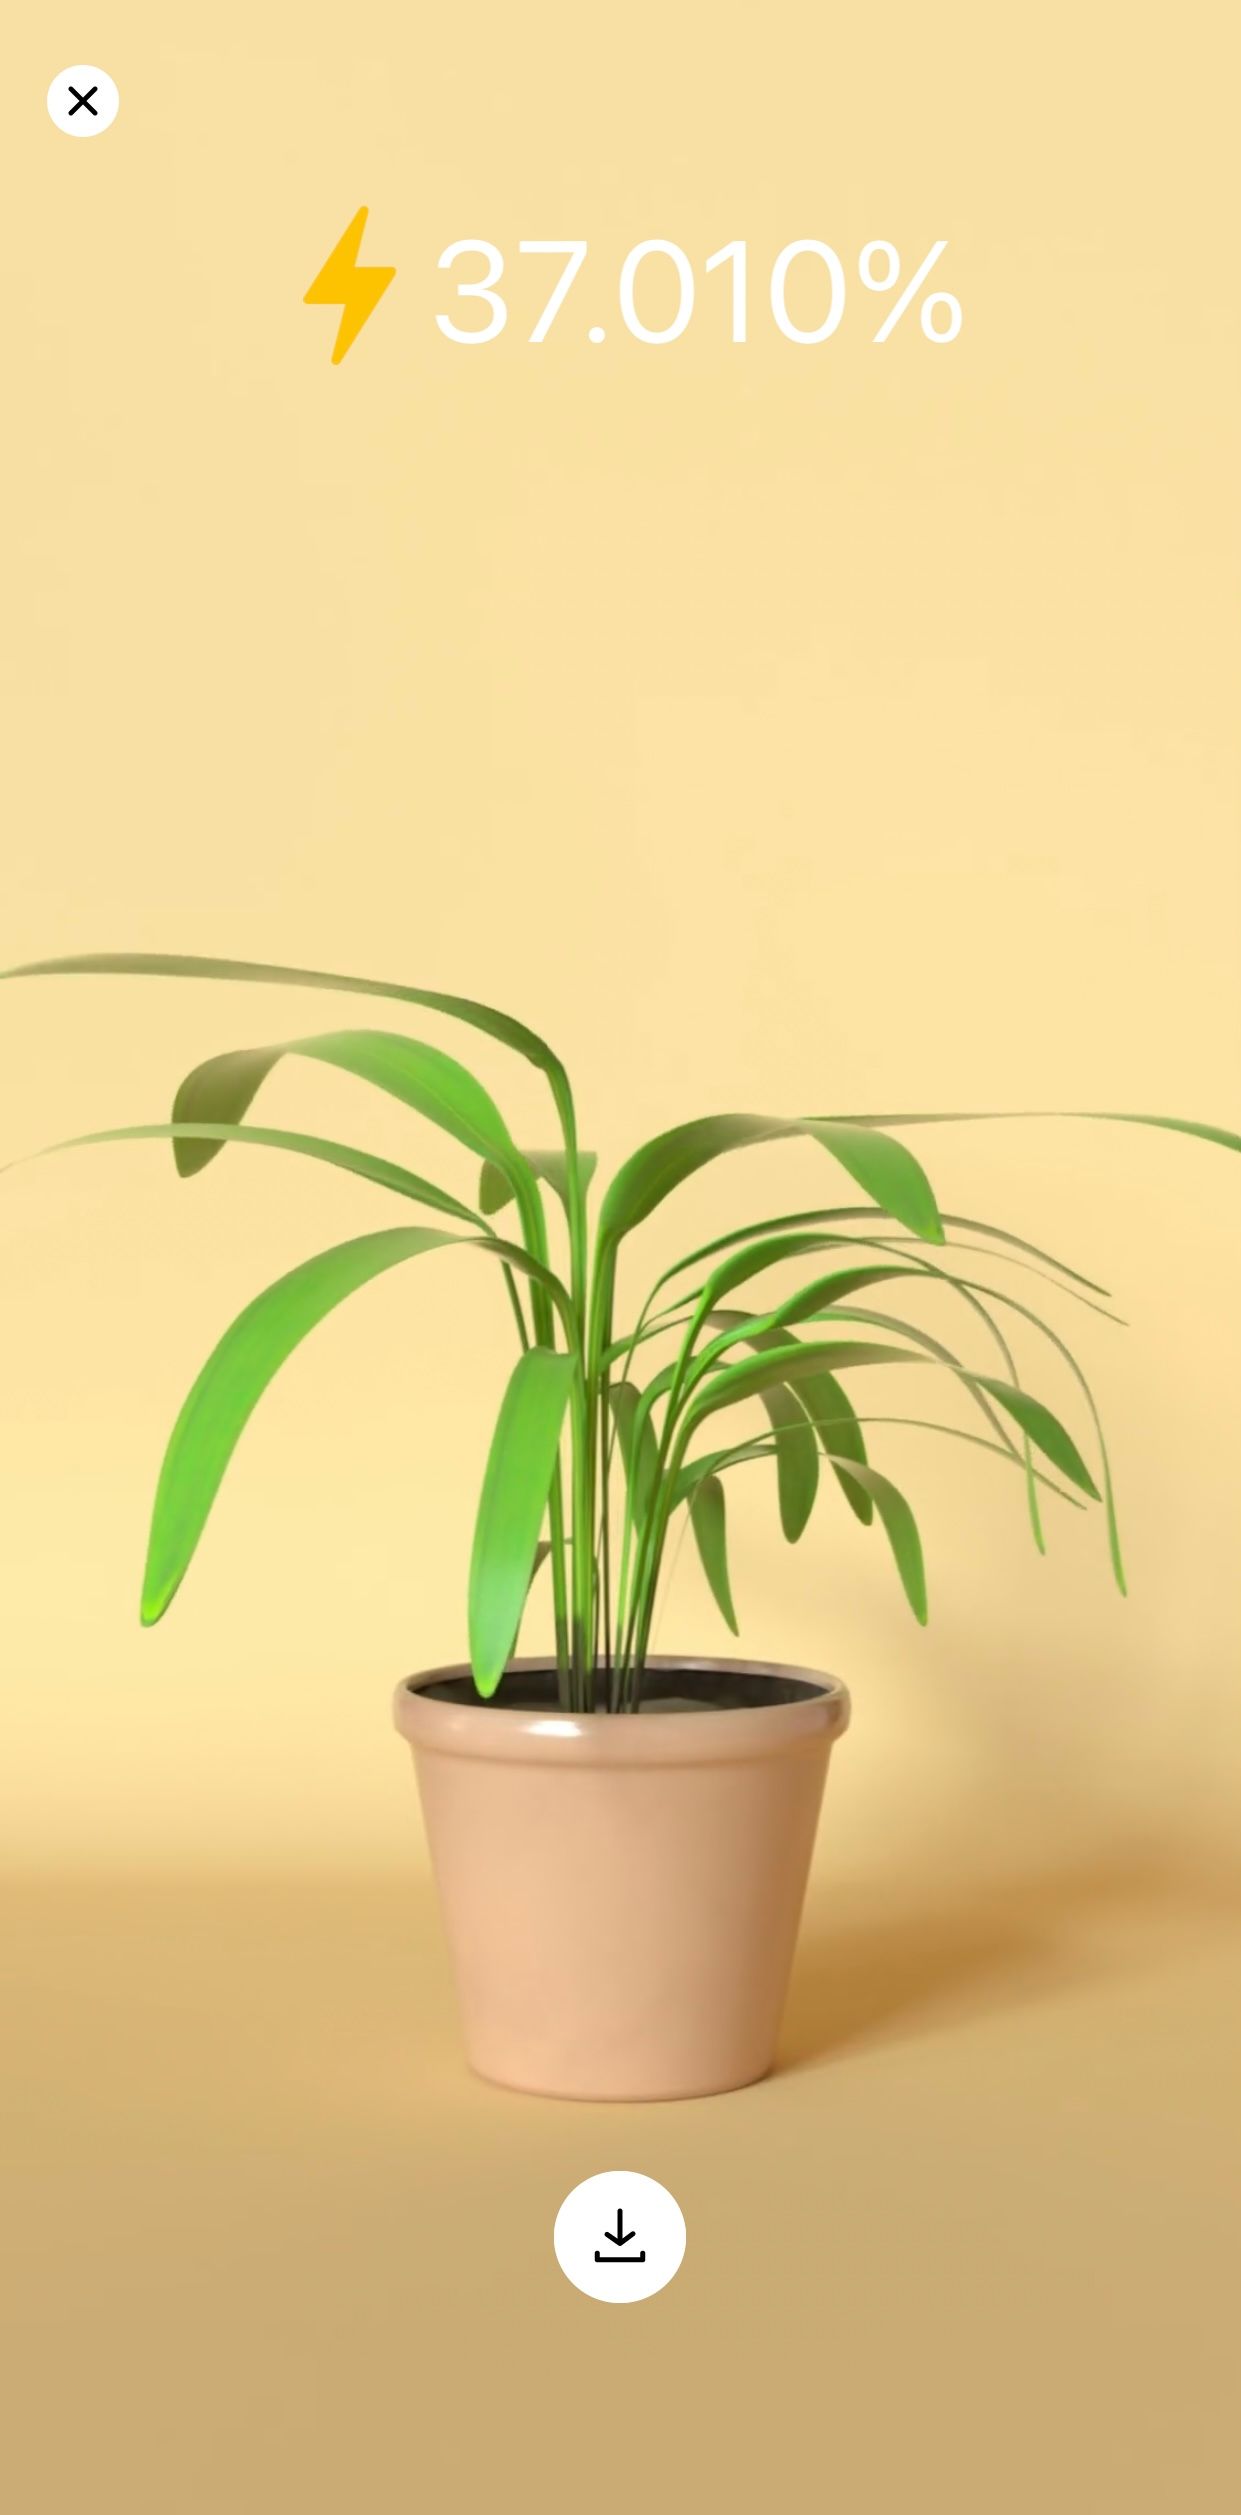 iPhone charging animation of half-erect potted plant against yellow-beige wall